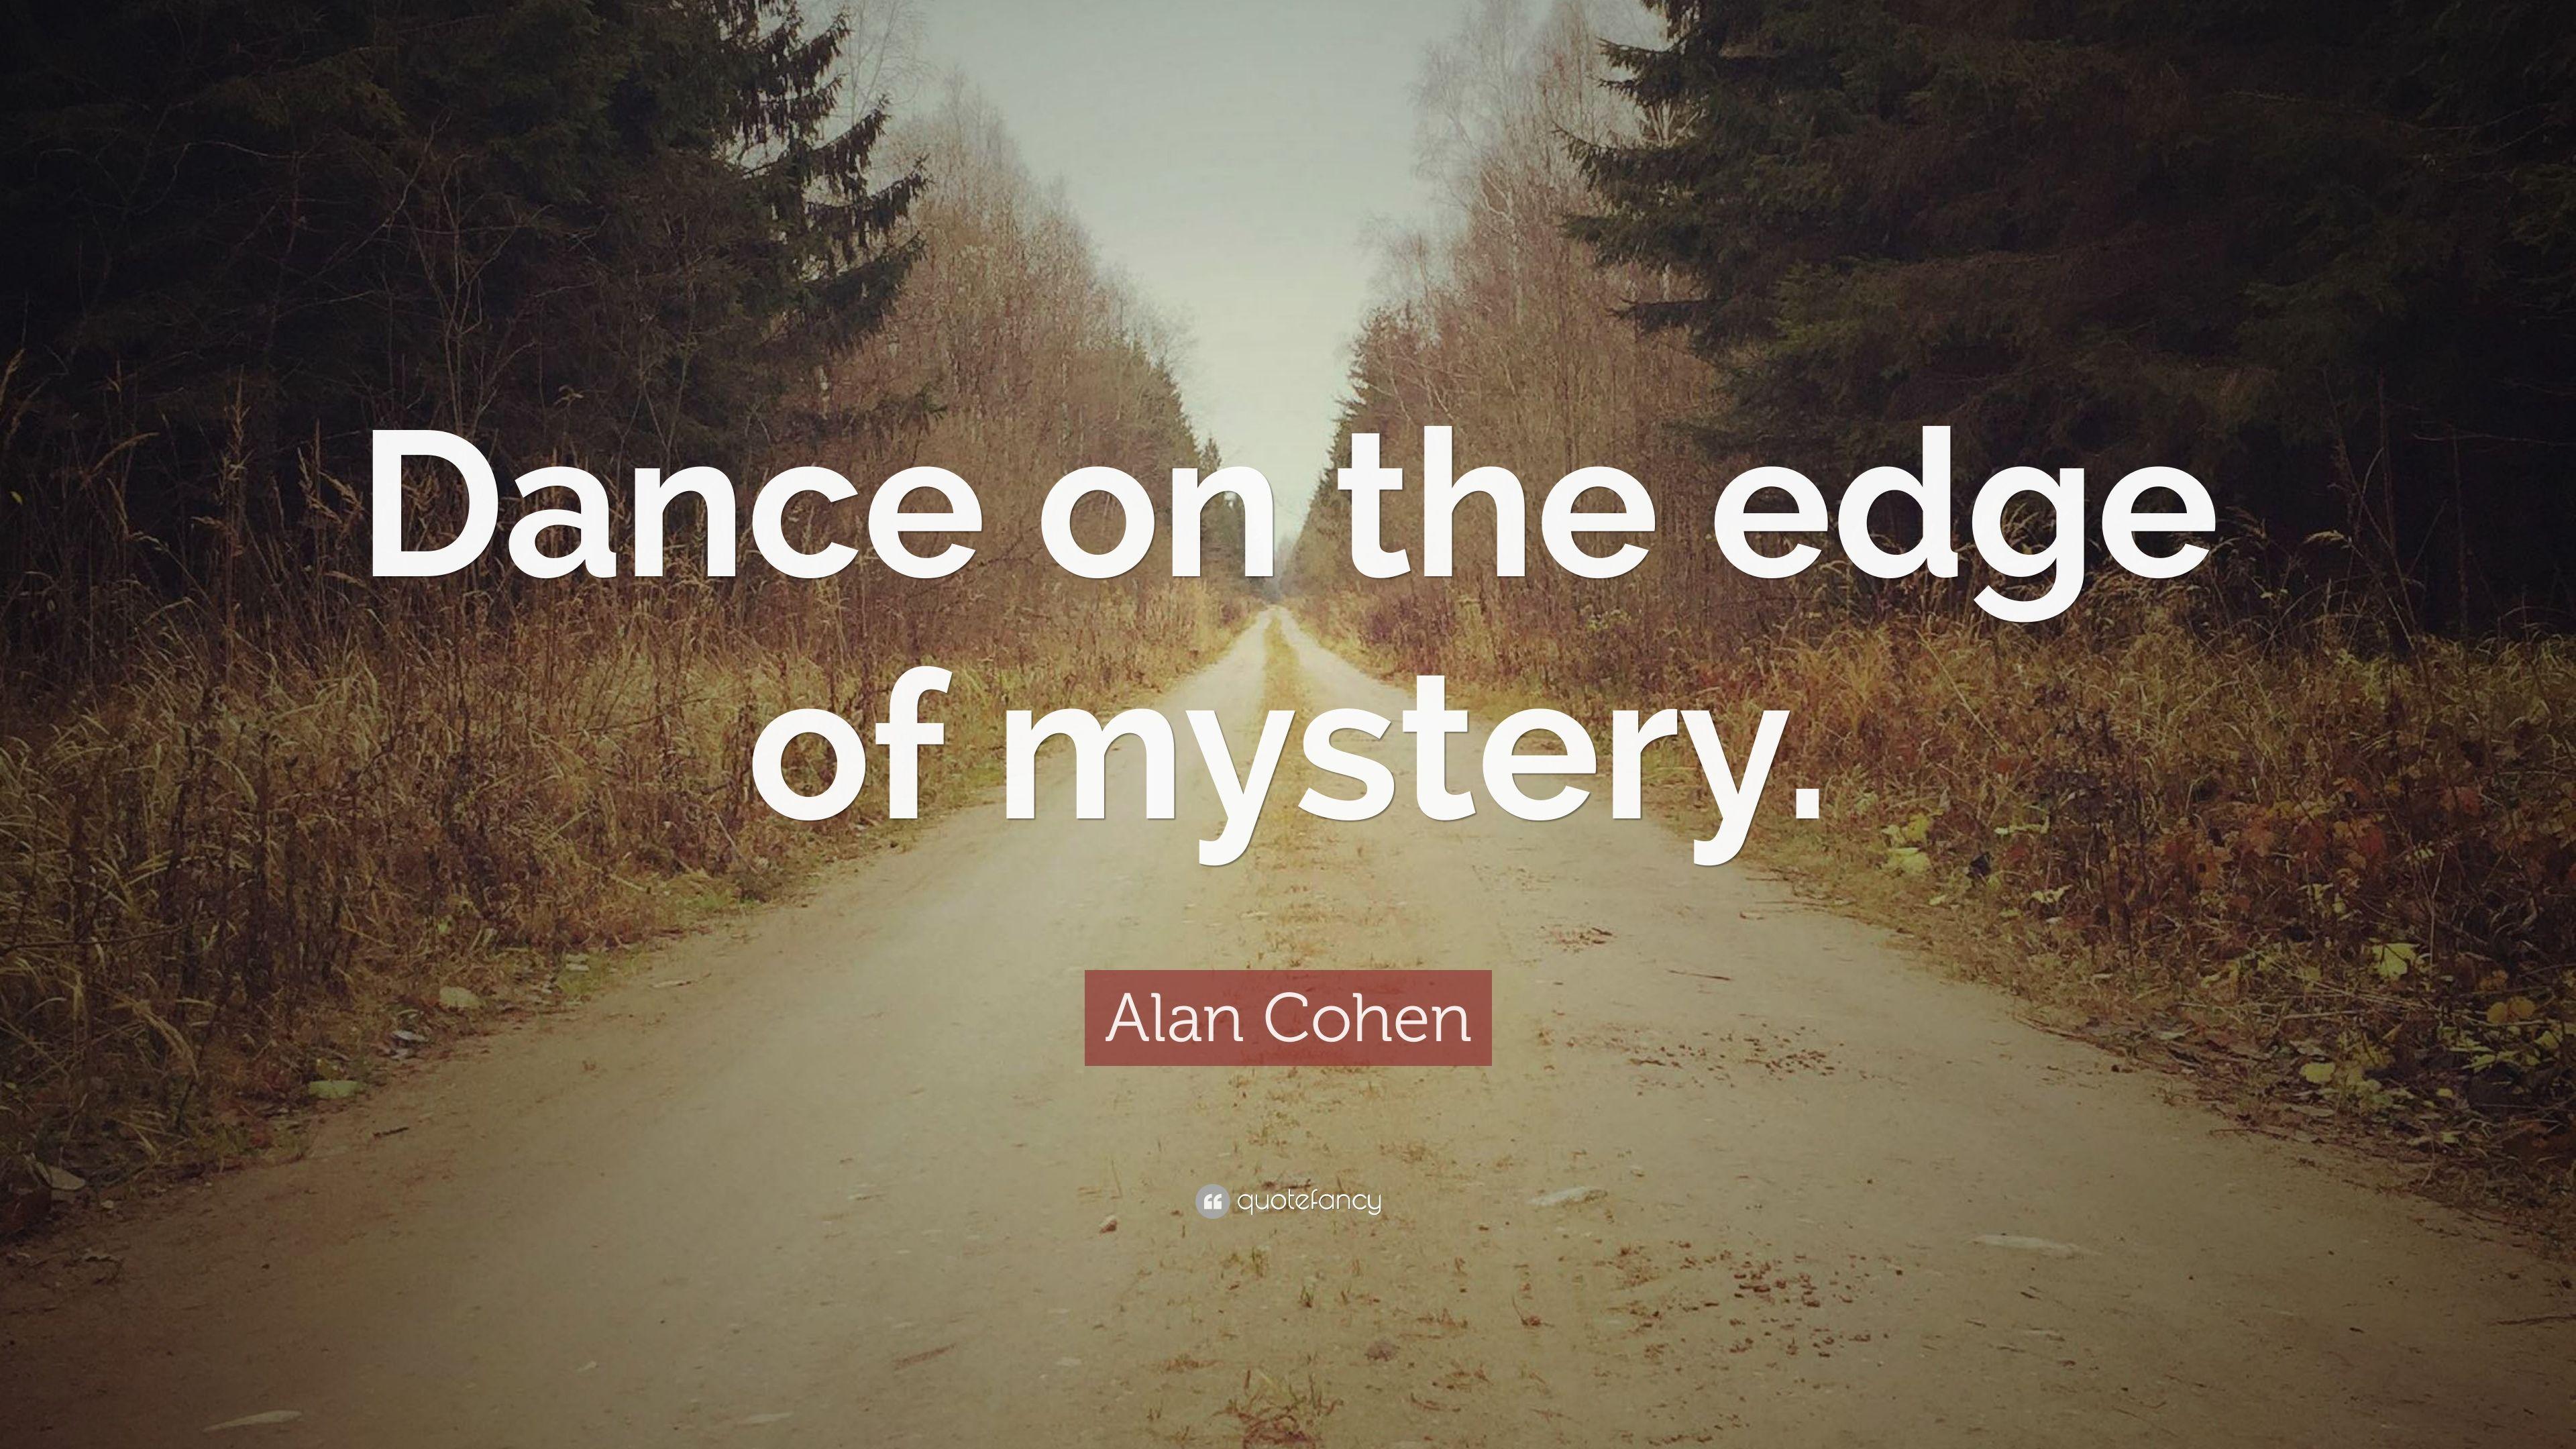 Alan Cohen Quote: “Dance on the edge of mystery.” 10 wallpaper